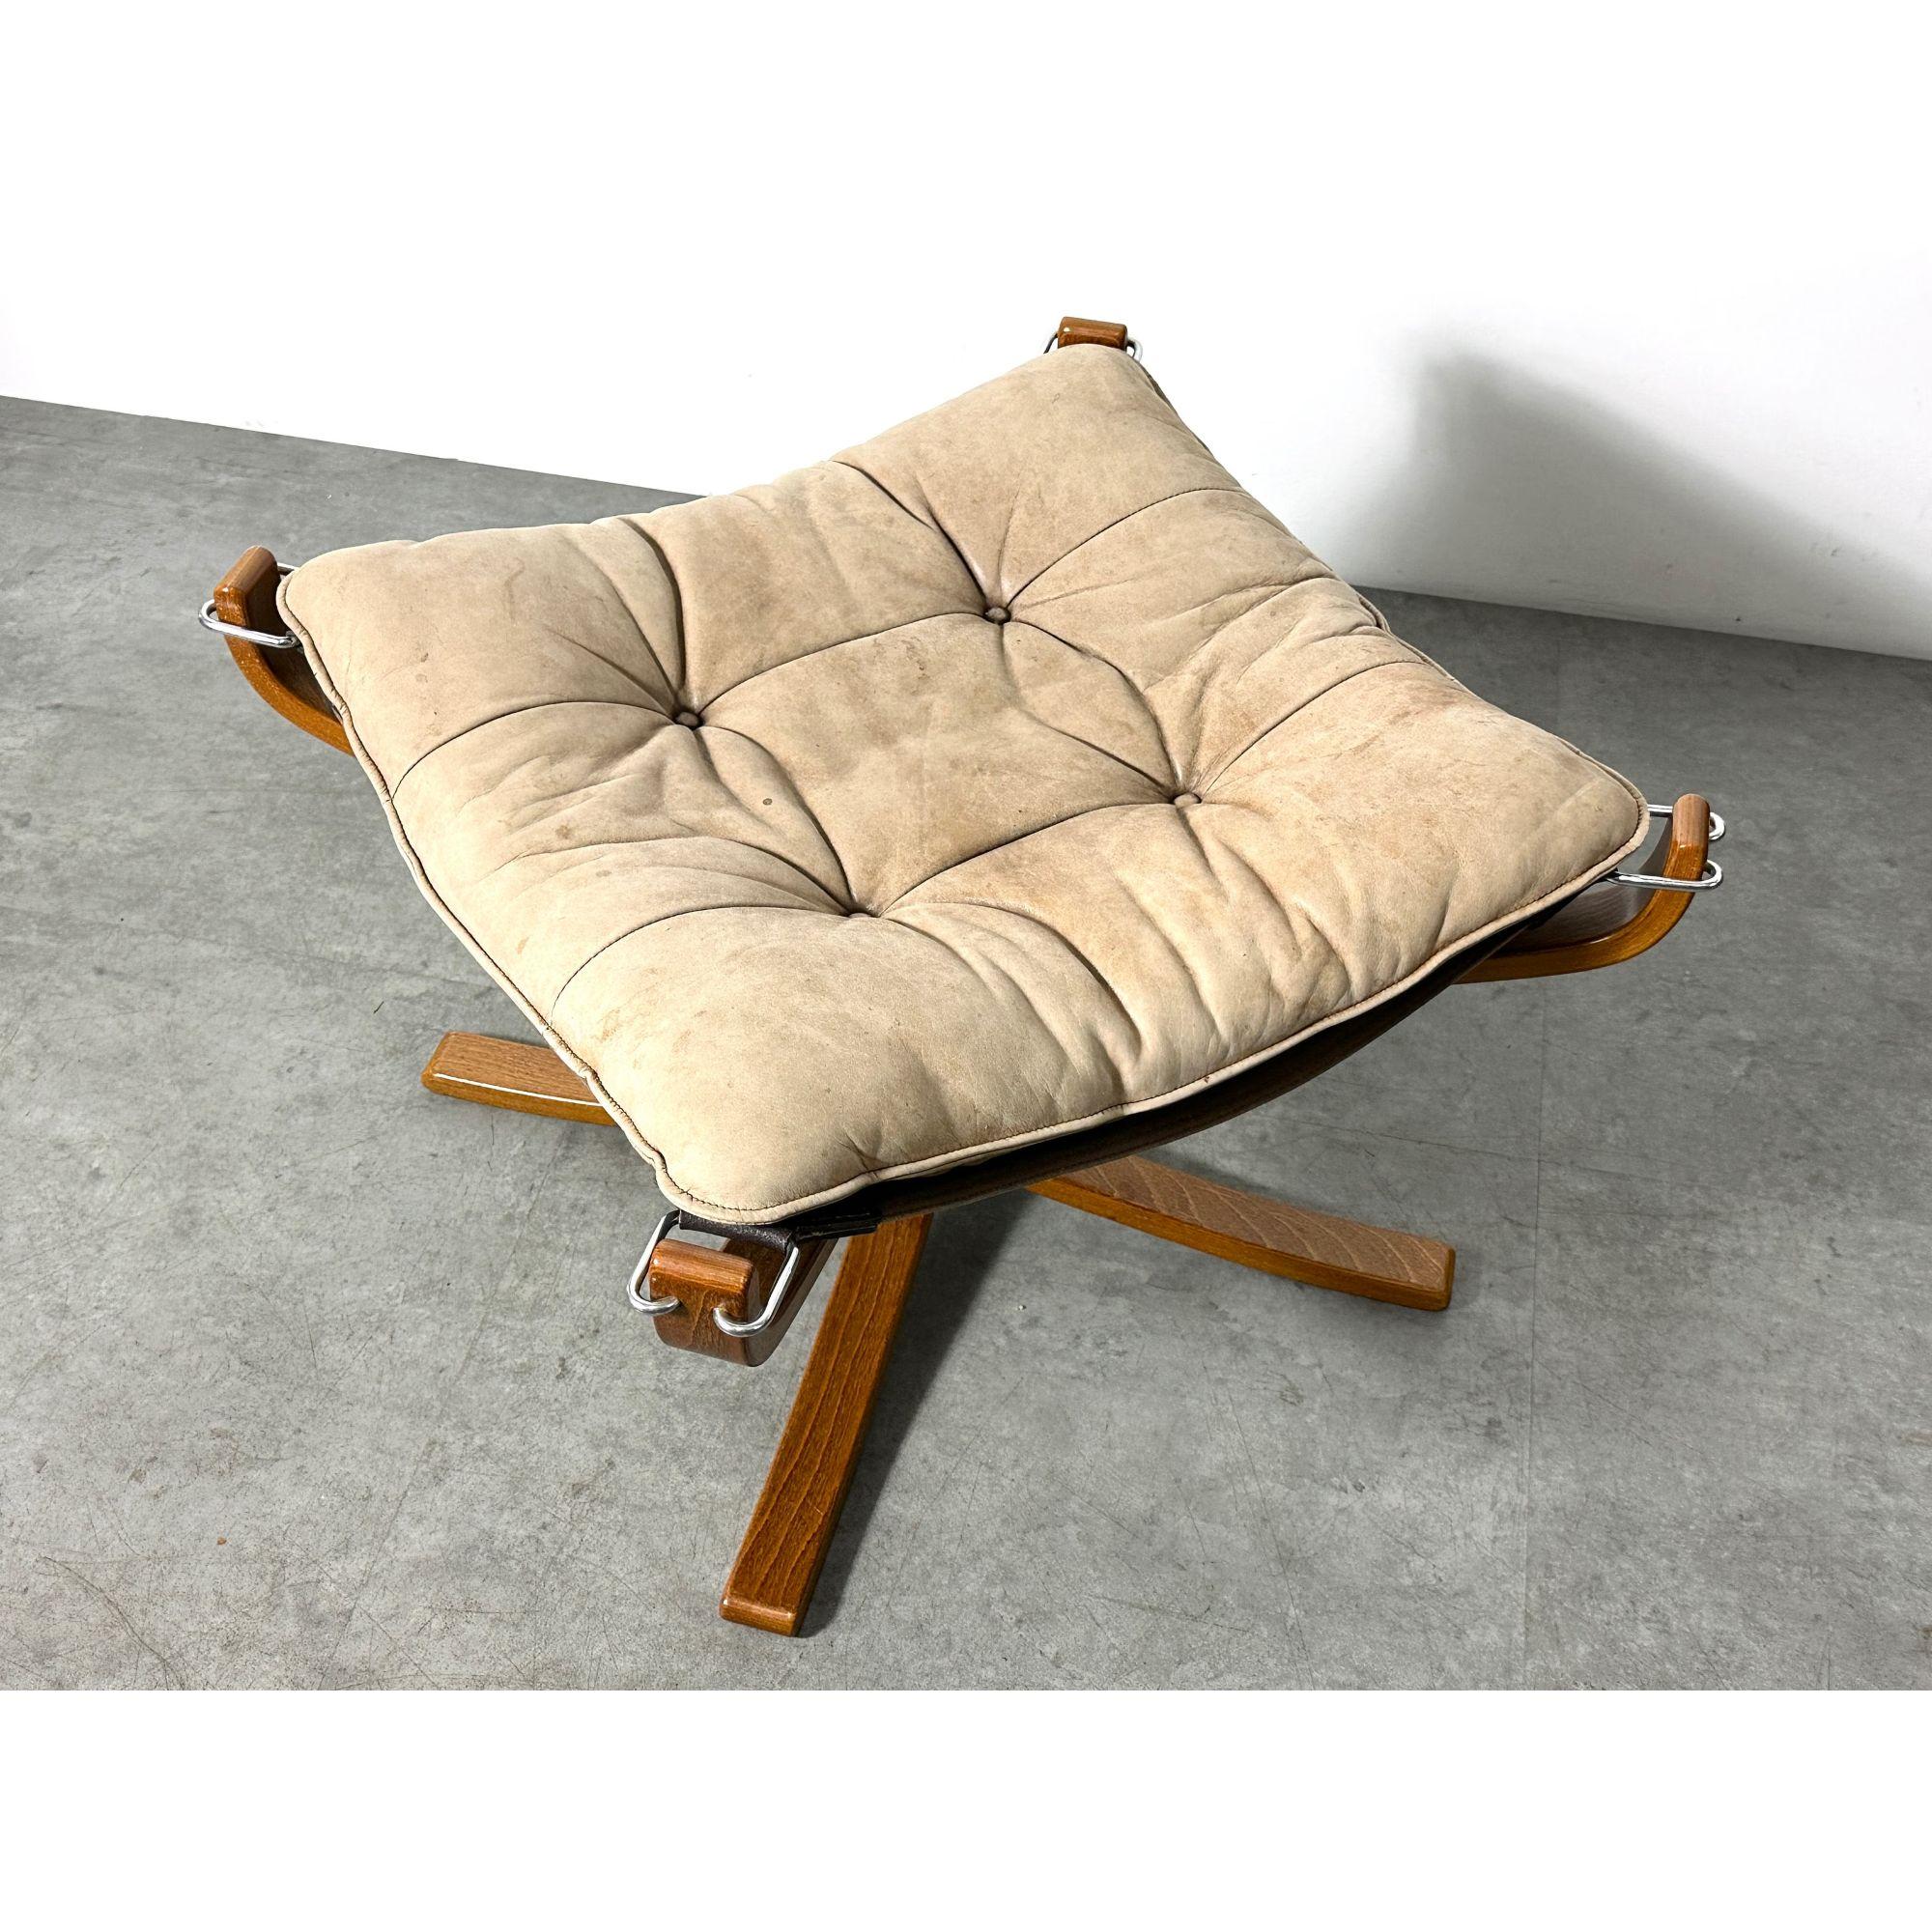 Vintage Leather Footstool Falcon Chair Ottoman by Sigurd Ressell for Vatne Mobler 1970s

Falcon footstool designed by Sigurd Ressell for Vatne Mobler Norway 1970s
Bentwood base with canvas sling and leather cushion
Signed to underside

Materials: